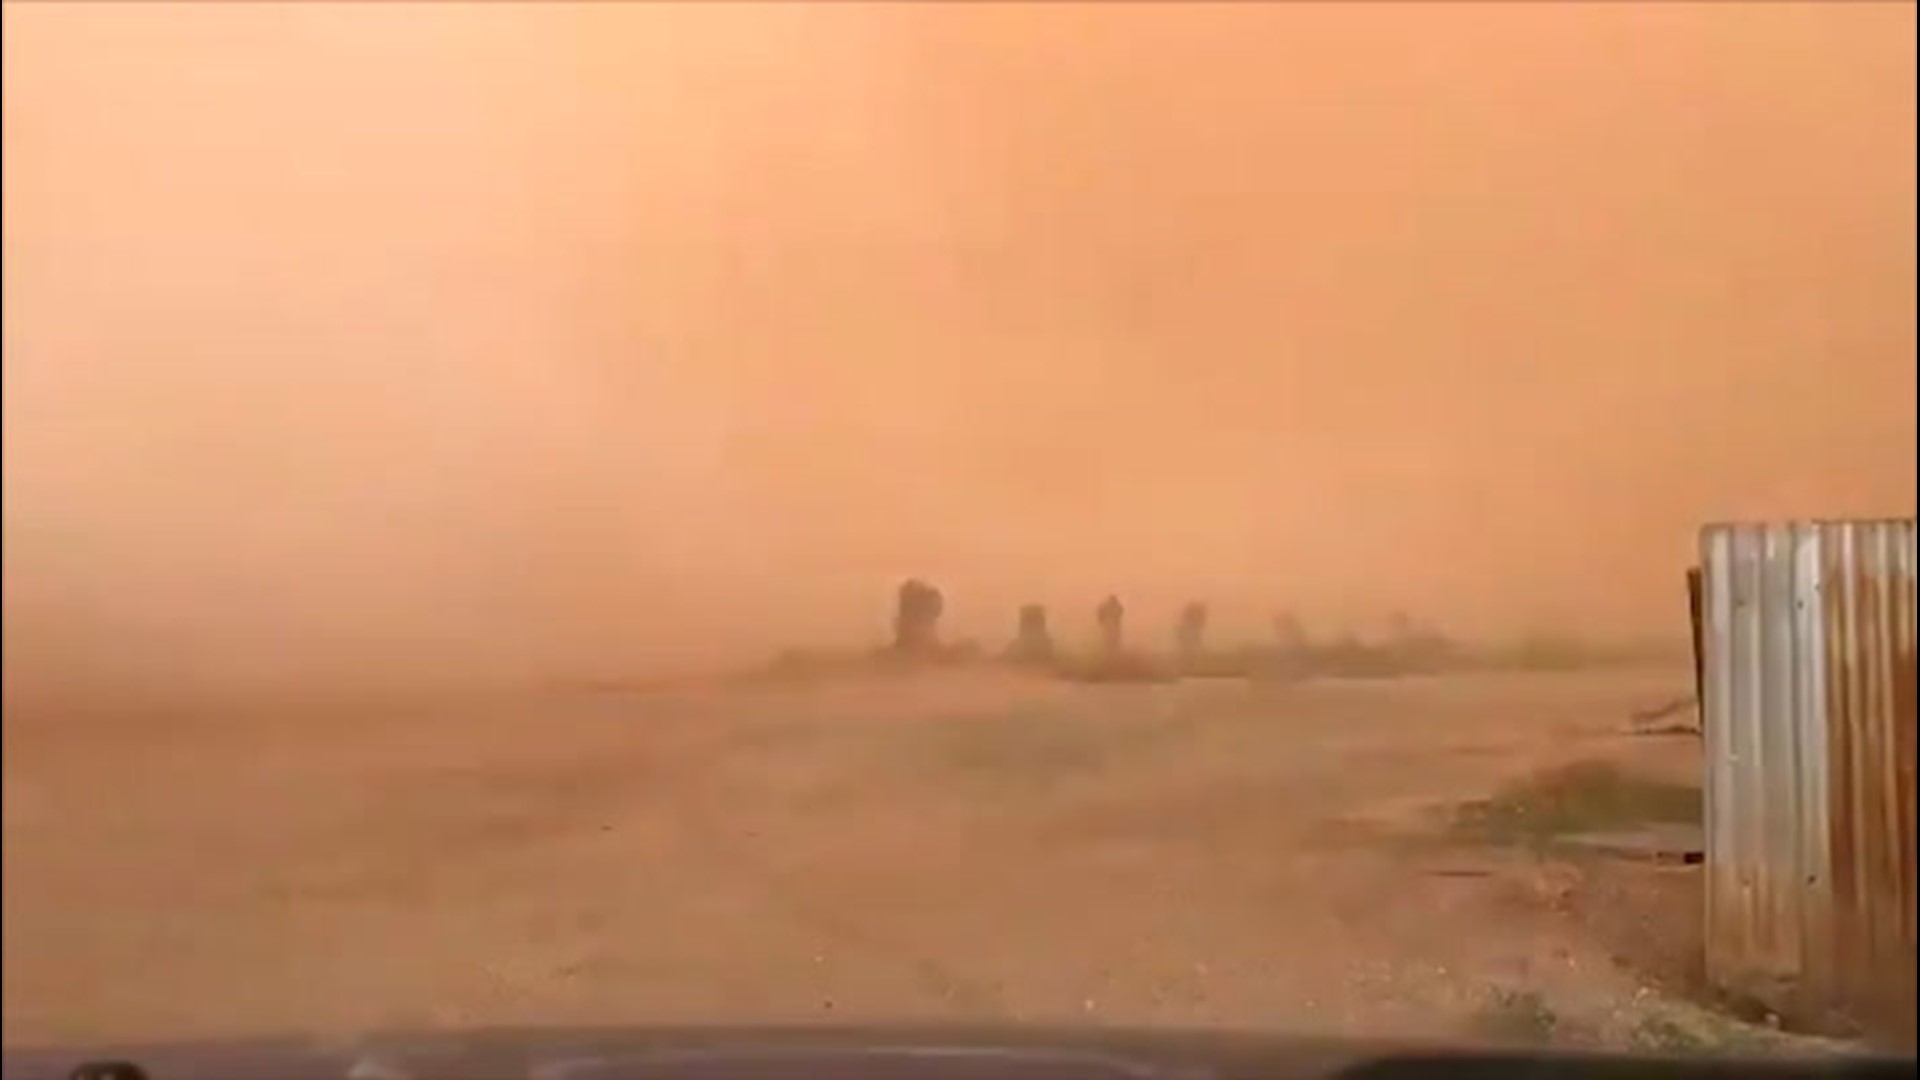 Molly and Annabel O'Dea recorded this as a massive dust storm swept through the countryside in Yongala, South Australia, on April 3.